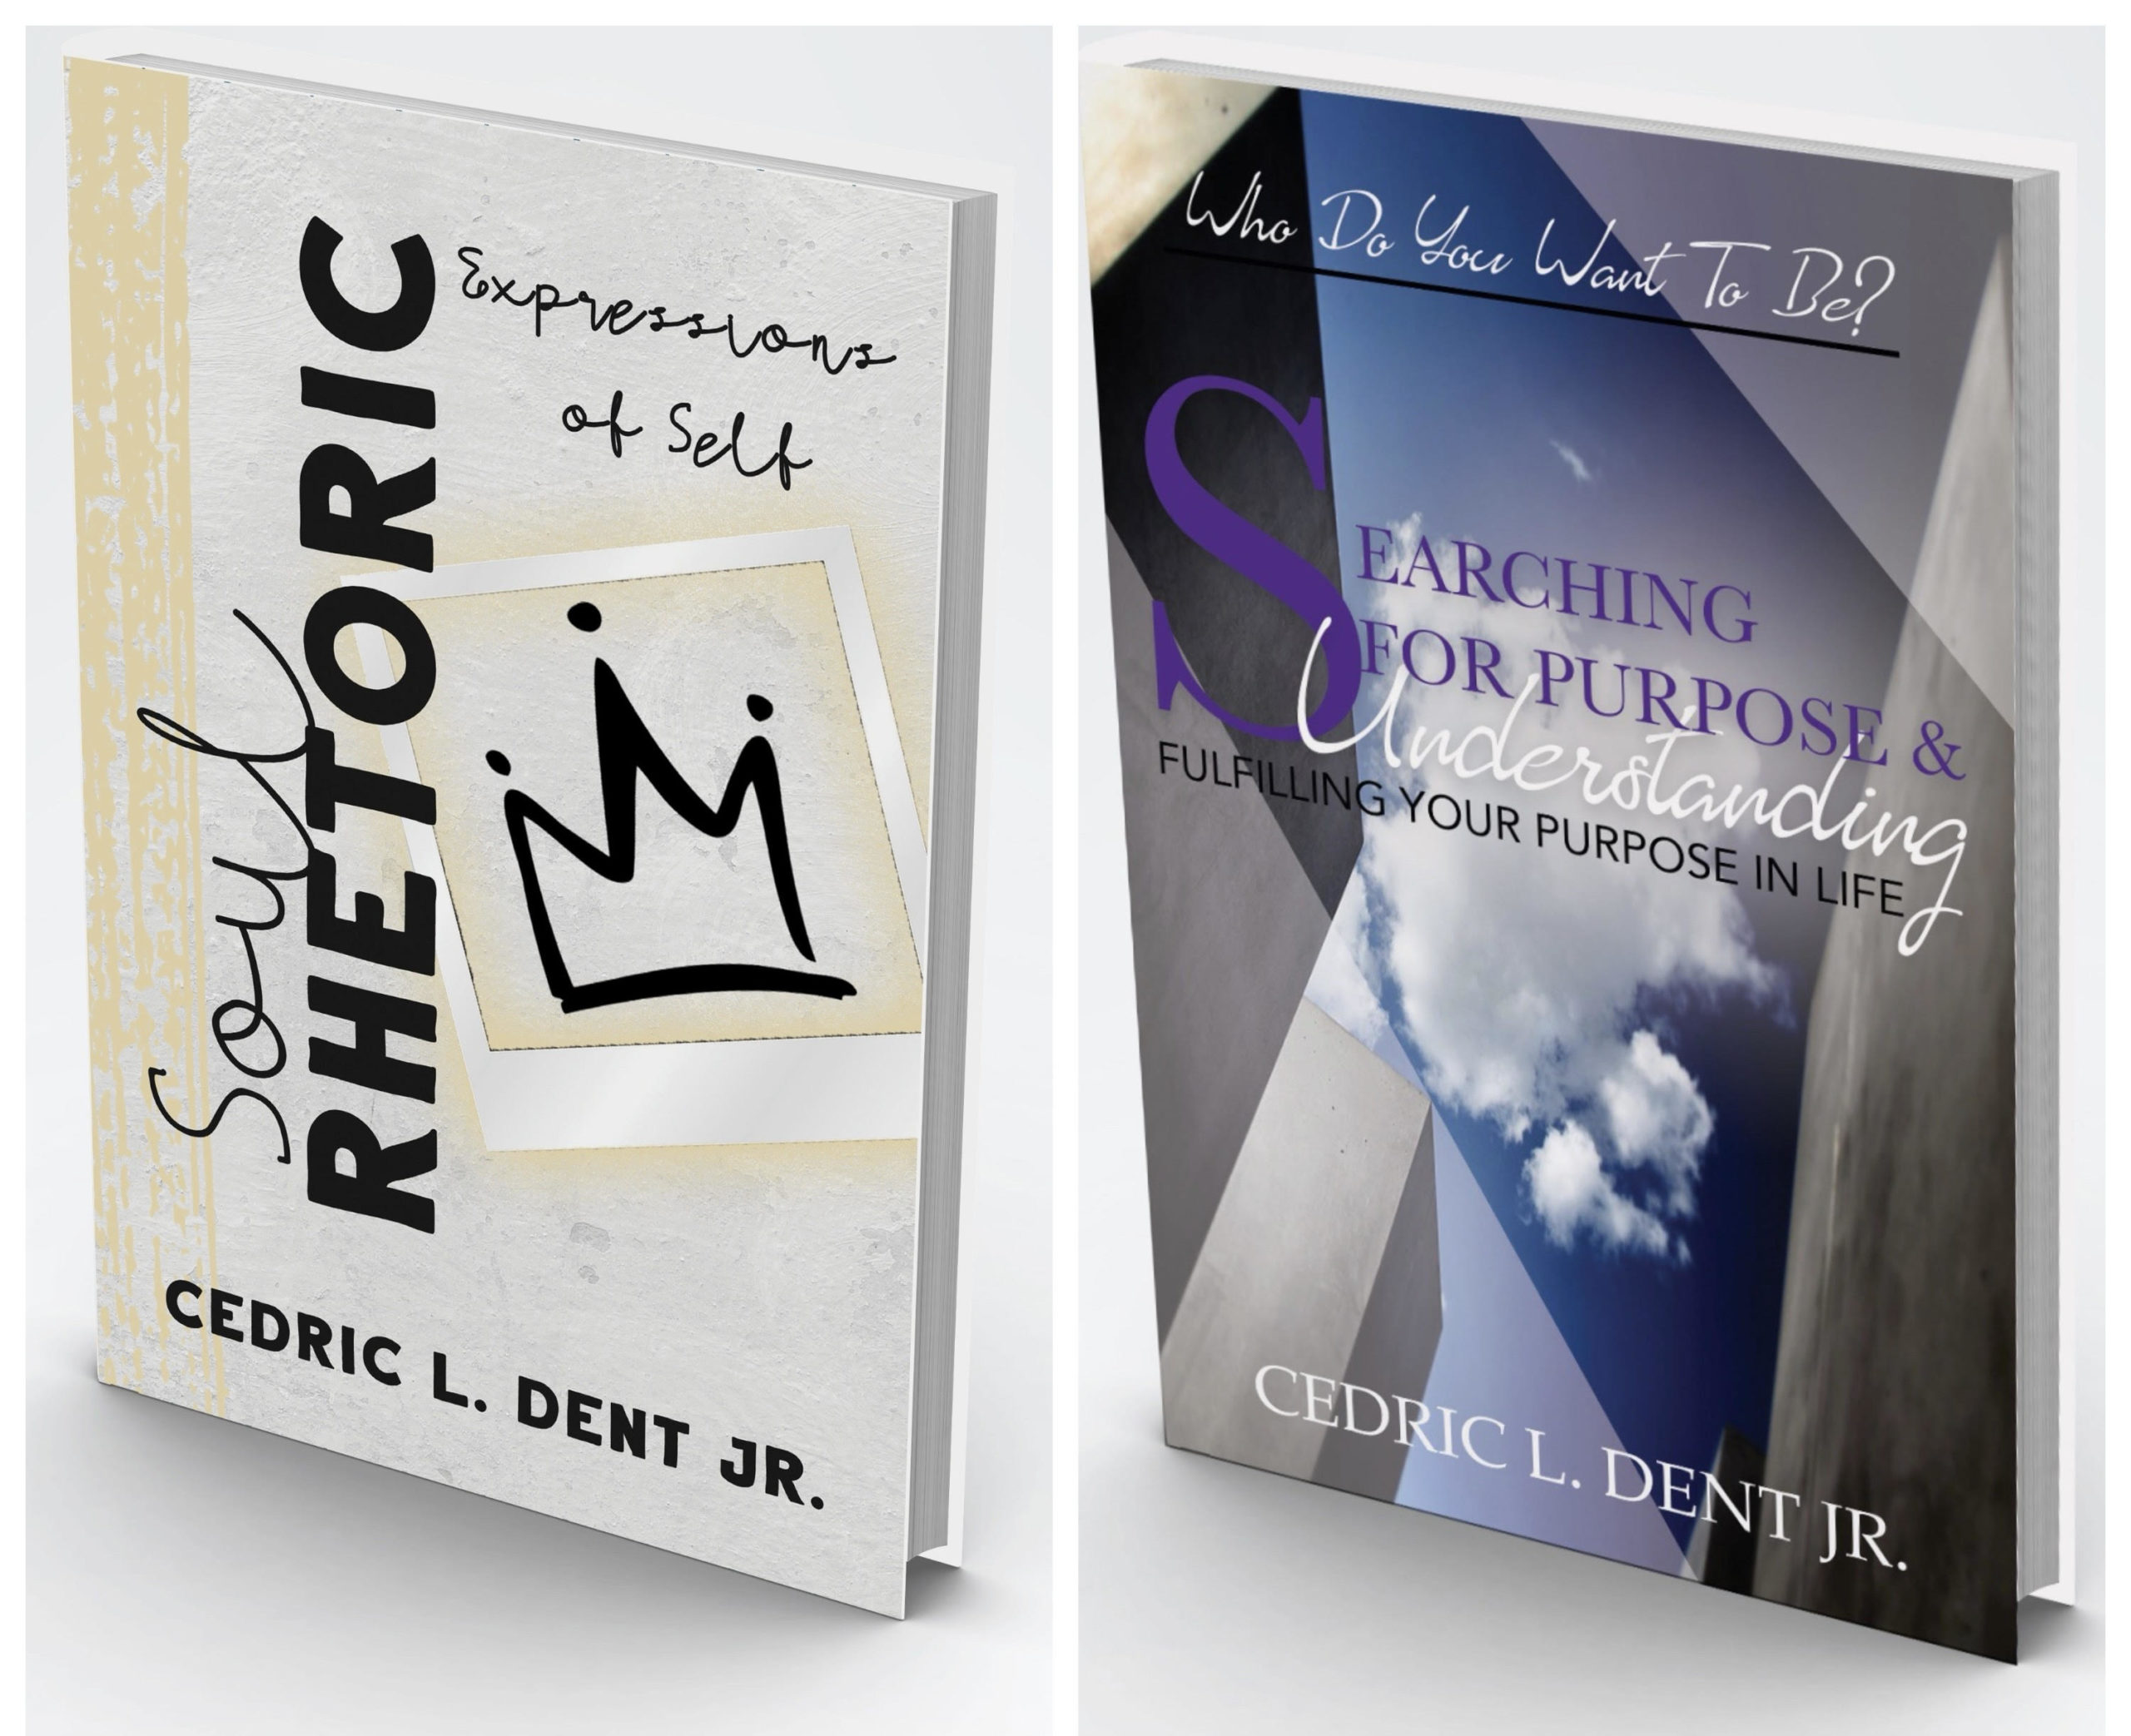 Image of Cedric Dent, Jr's Books Soul Rhetoric and Searching for Purpose & Understanding